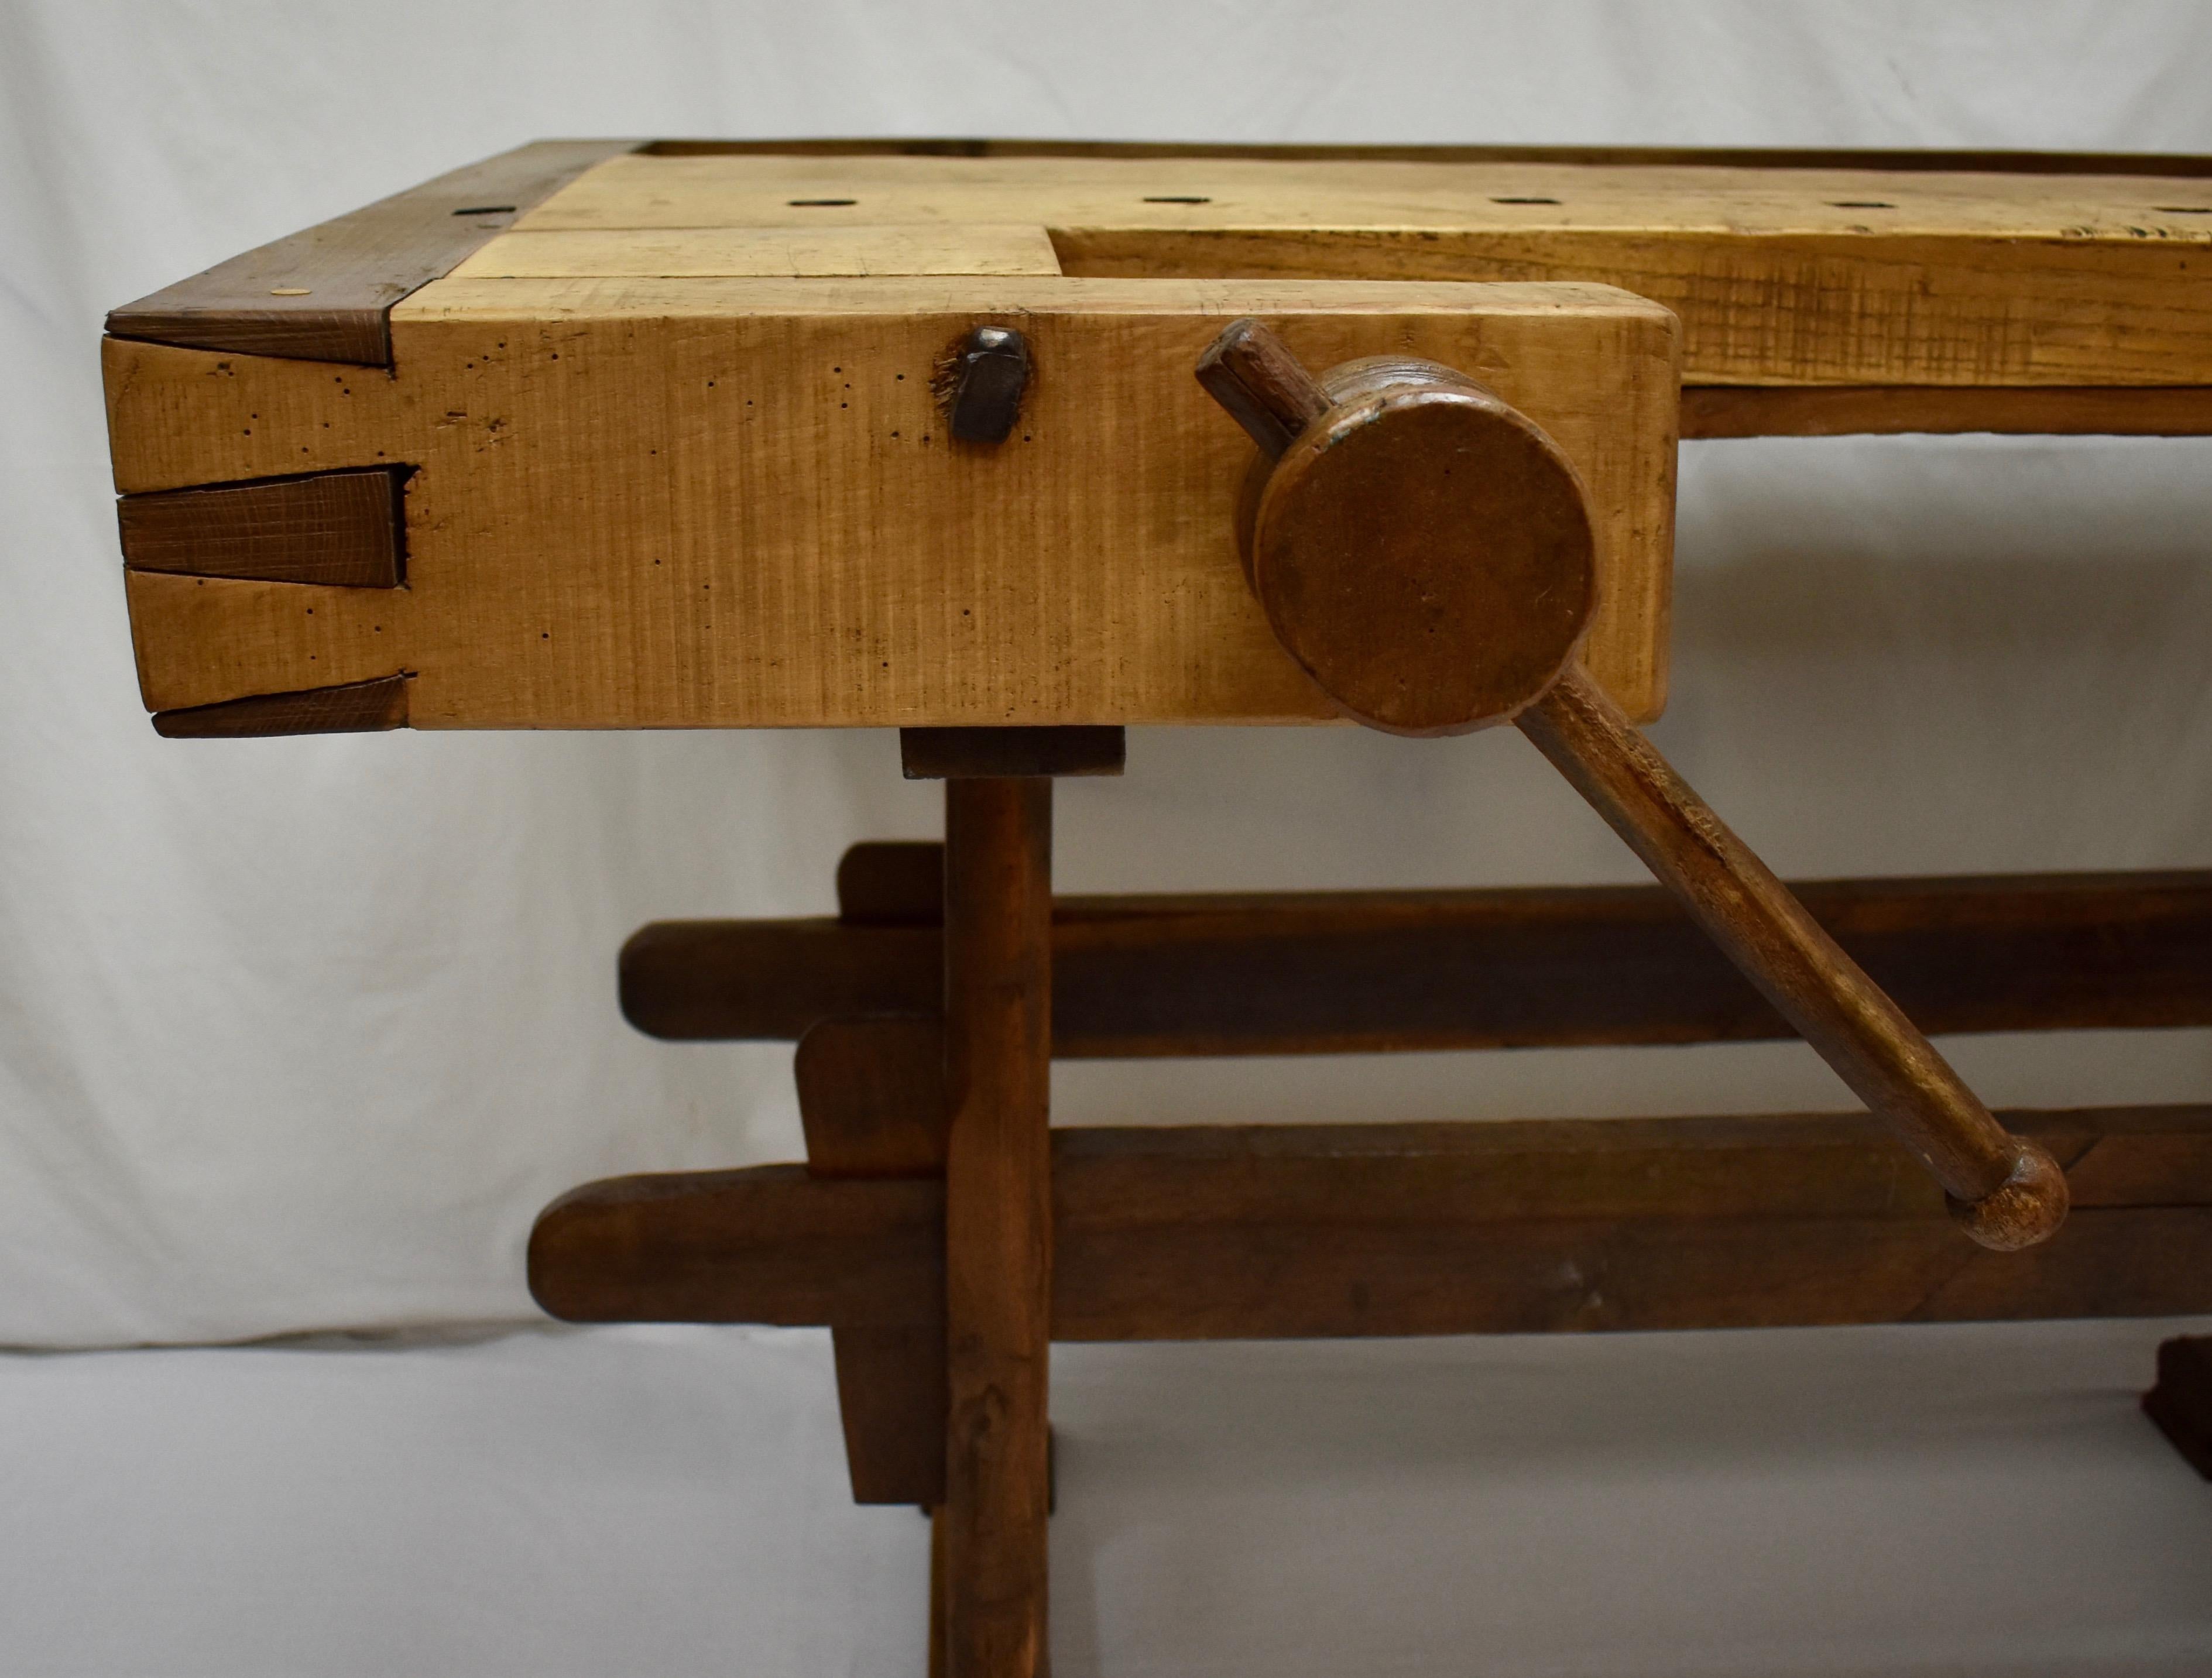 20th Century Oak Carpenter's and Joiner's Work Bench